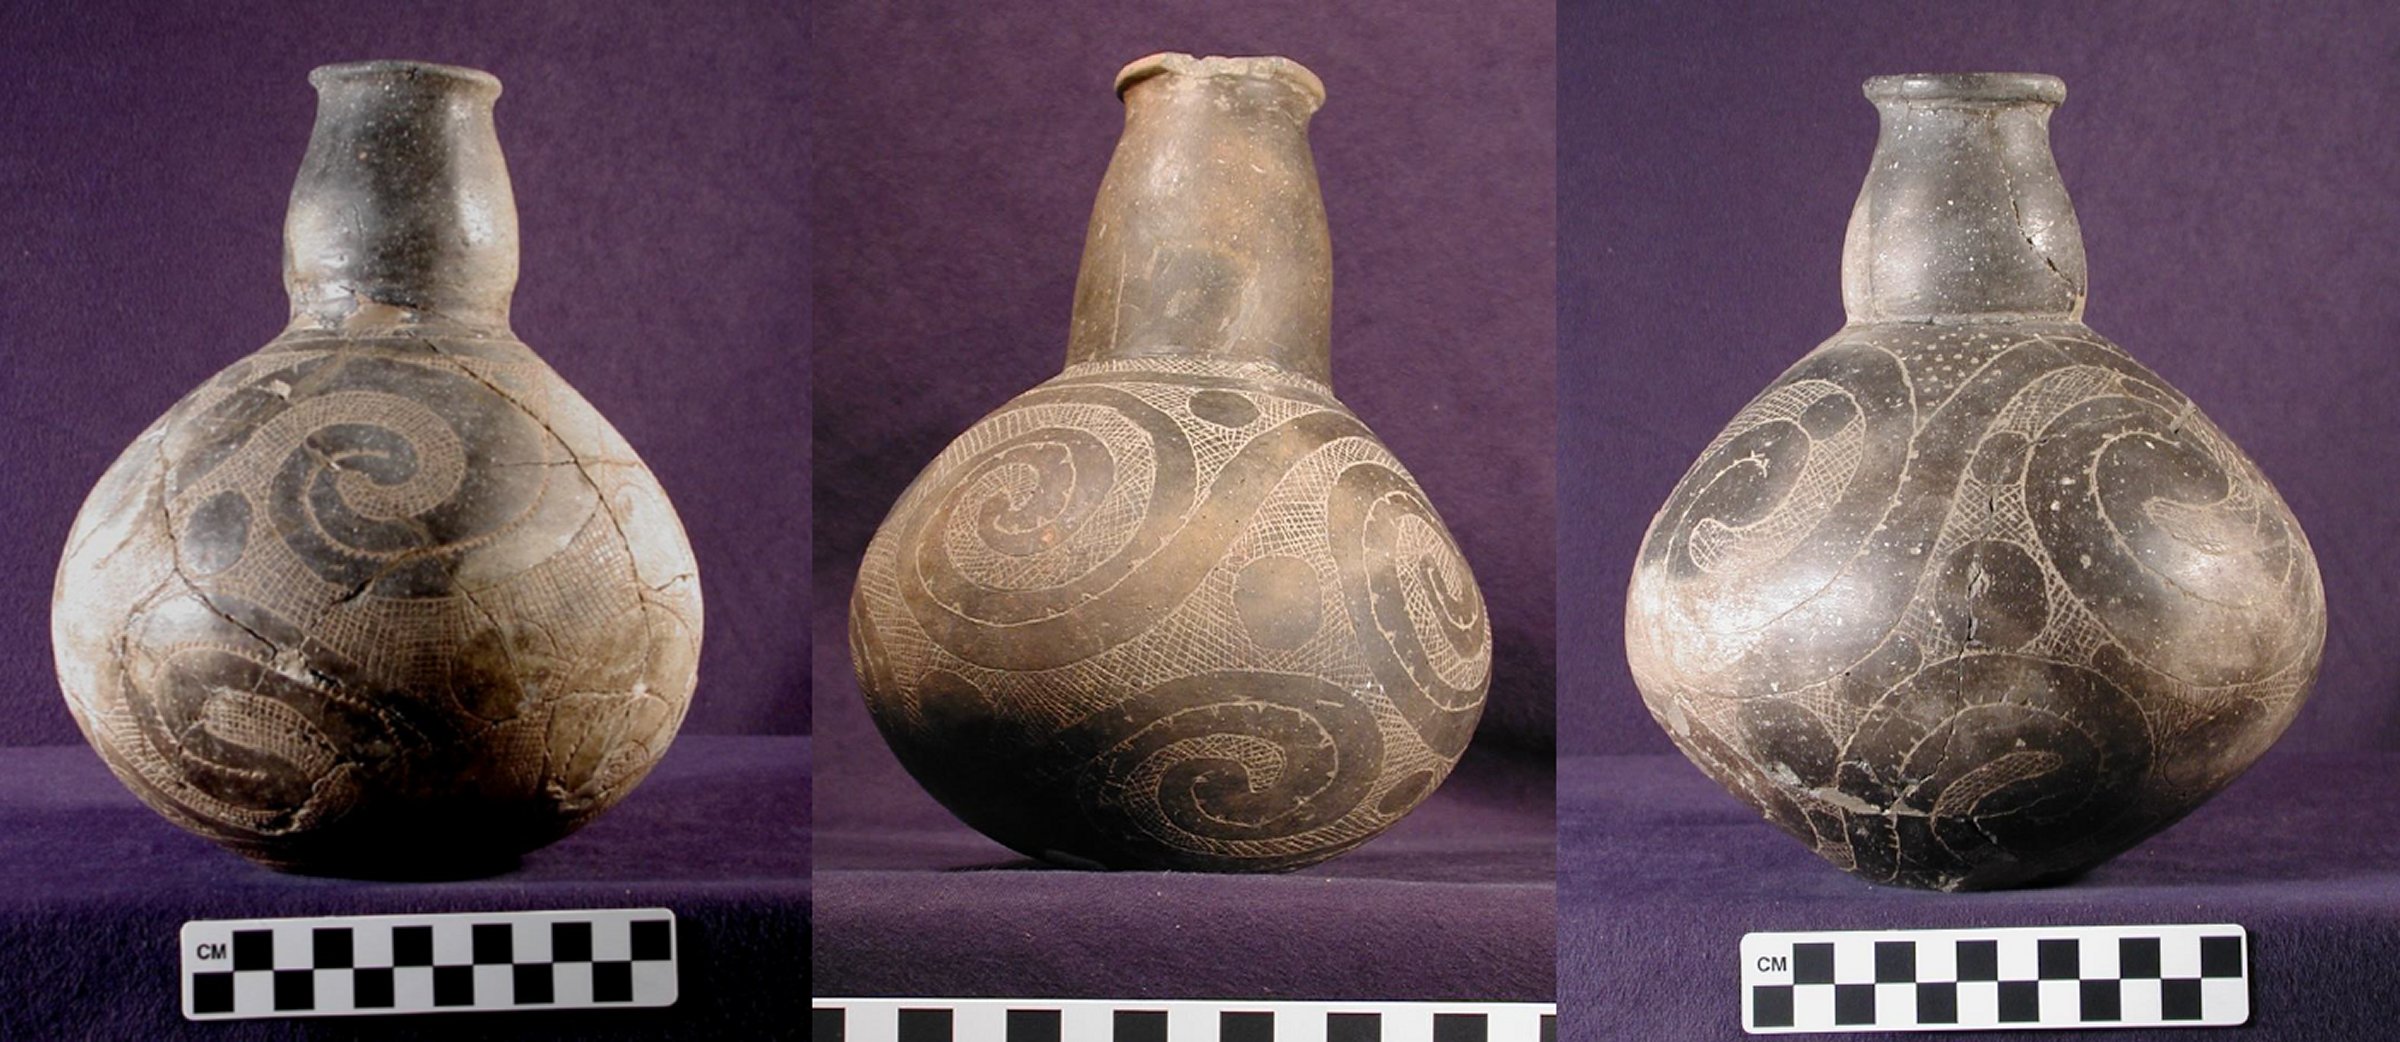 Three brown rotund pieces of pottery with thinner necks and round openings at the top all feature swirling line and circle patterns.